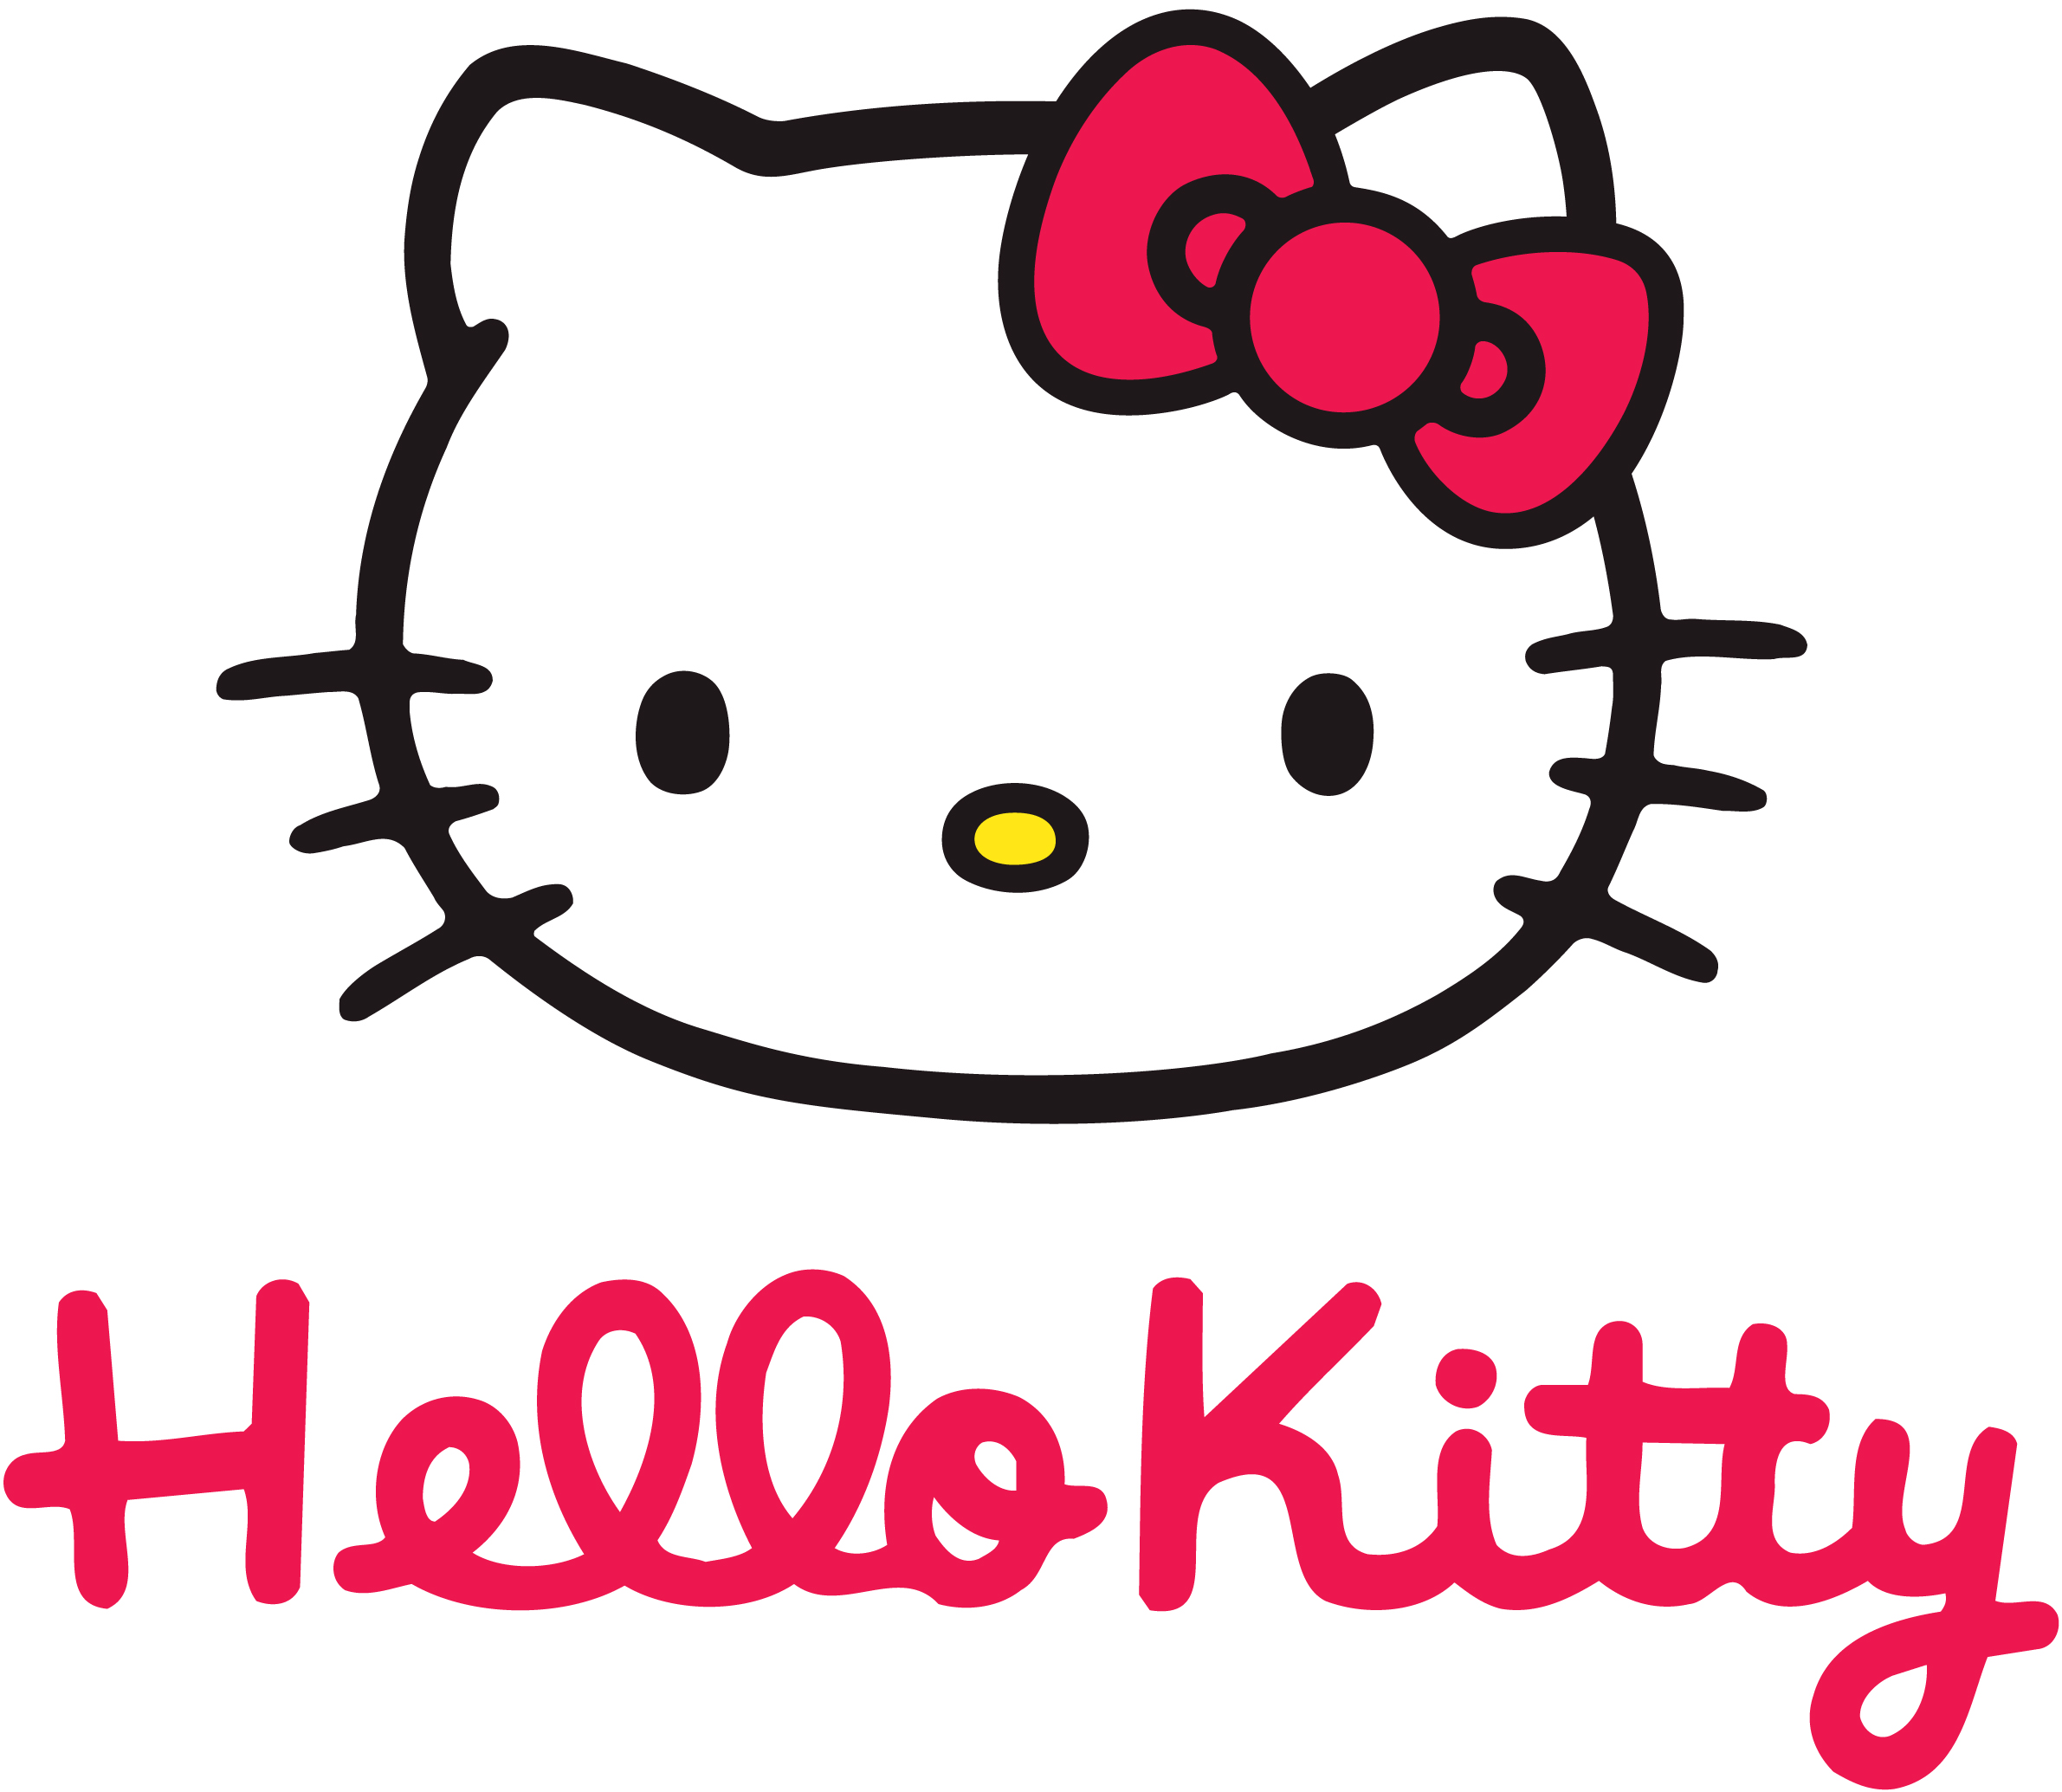 Hello Kitty Wallpaper Original Picture and Name for Many Purposes